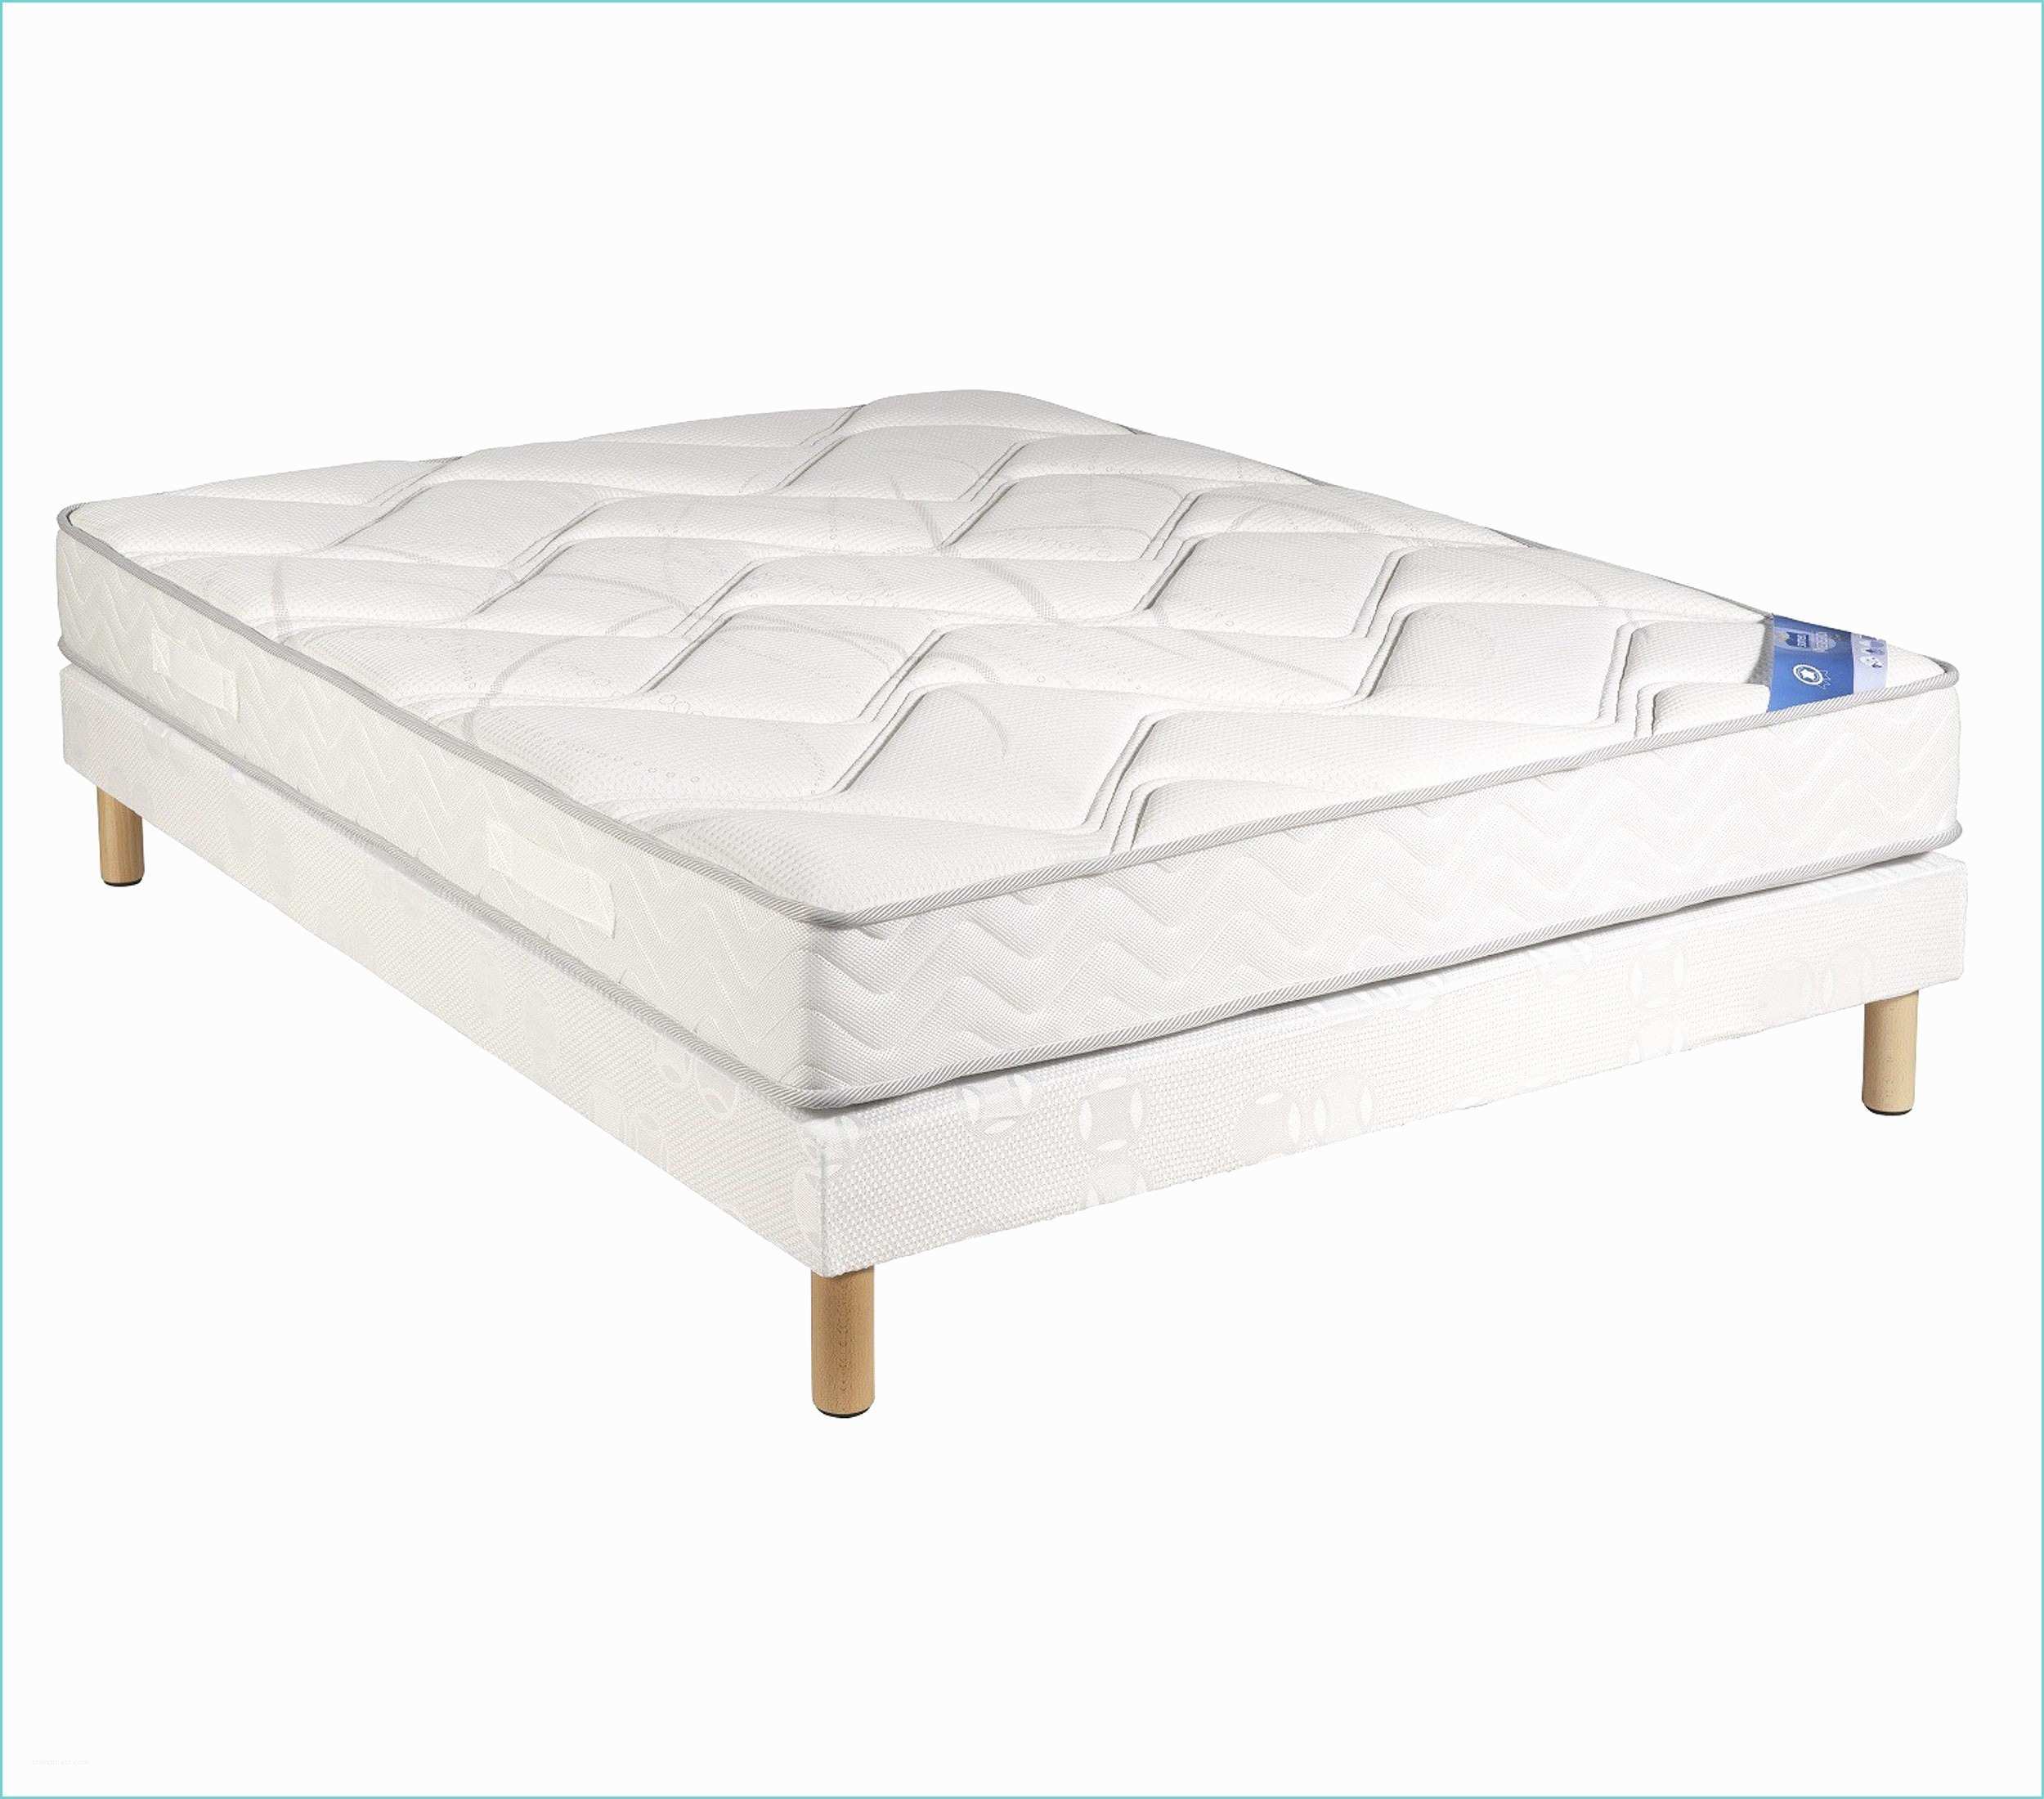 Matelas A Ressort Ou Mousse 13 Awesome sommier Et Matelas Conforama Nilewide